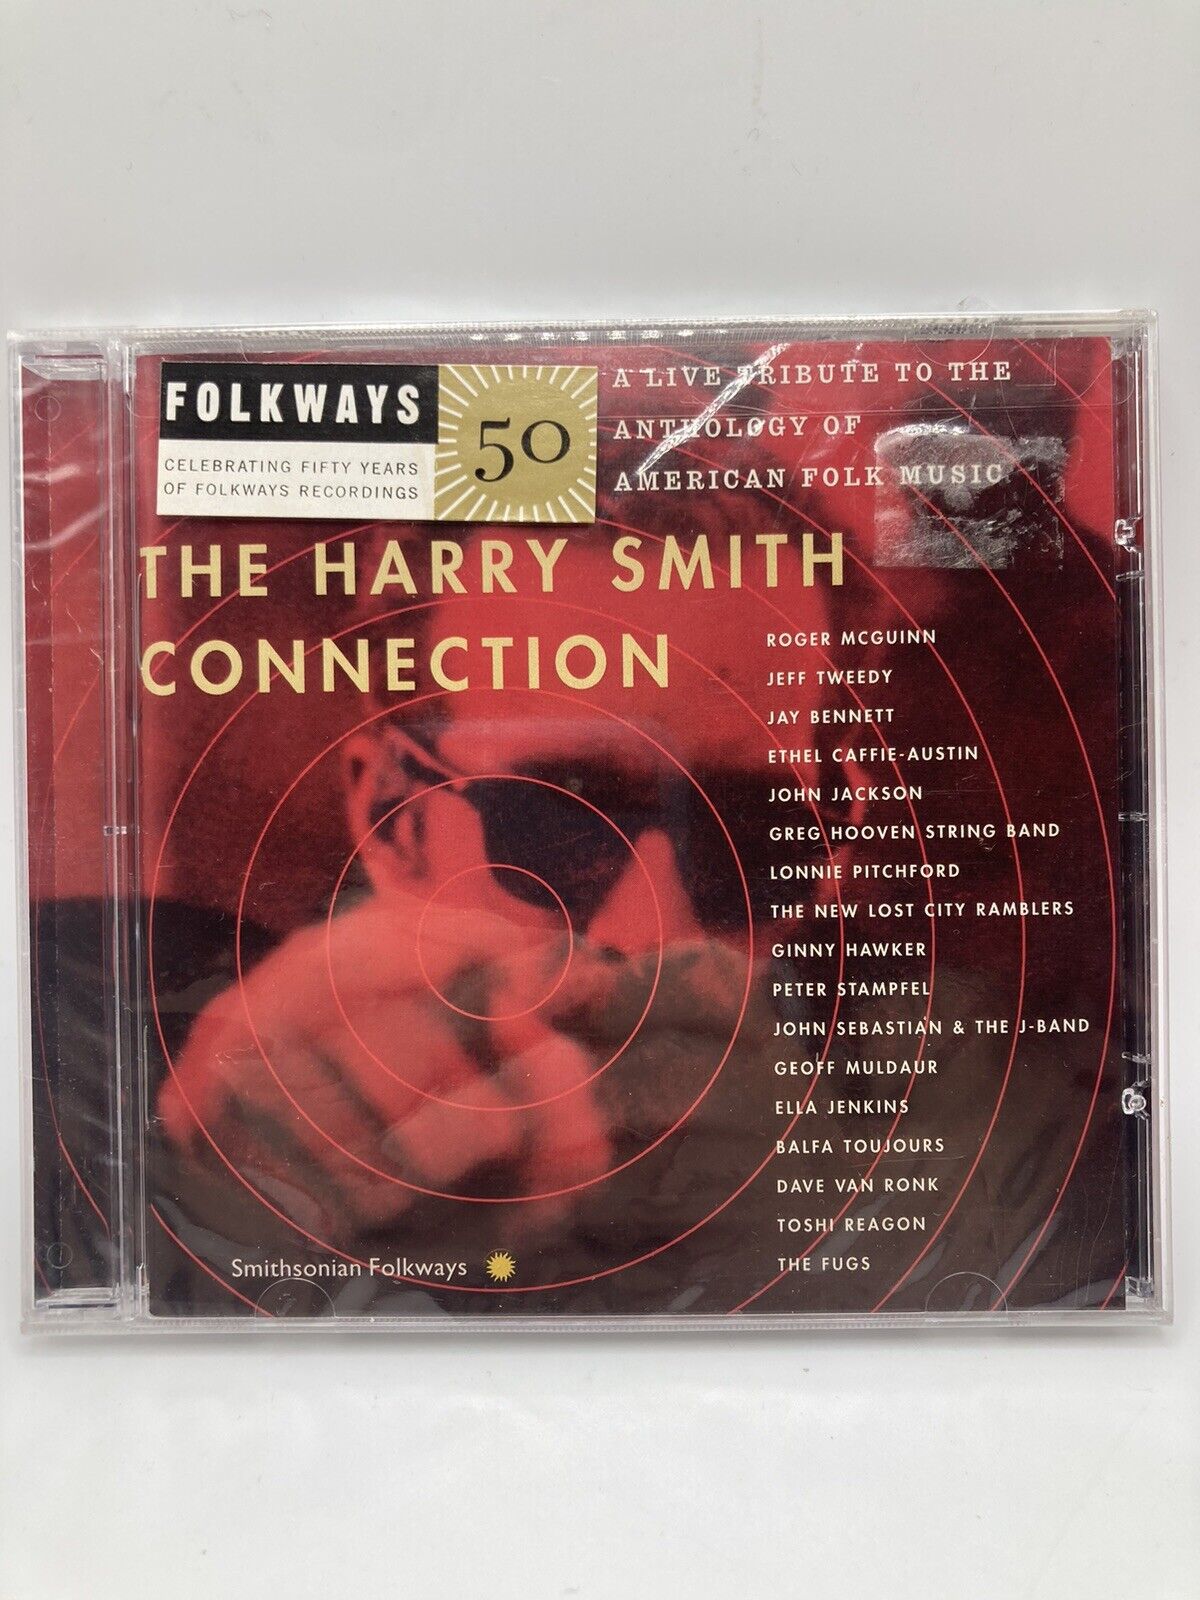 Harry Smith Connection/American Folk Anthology by Various Artists (CD, 1998) New